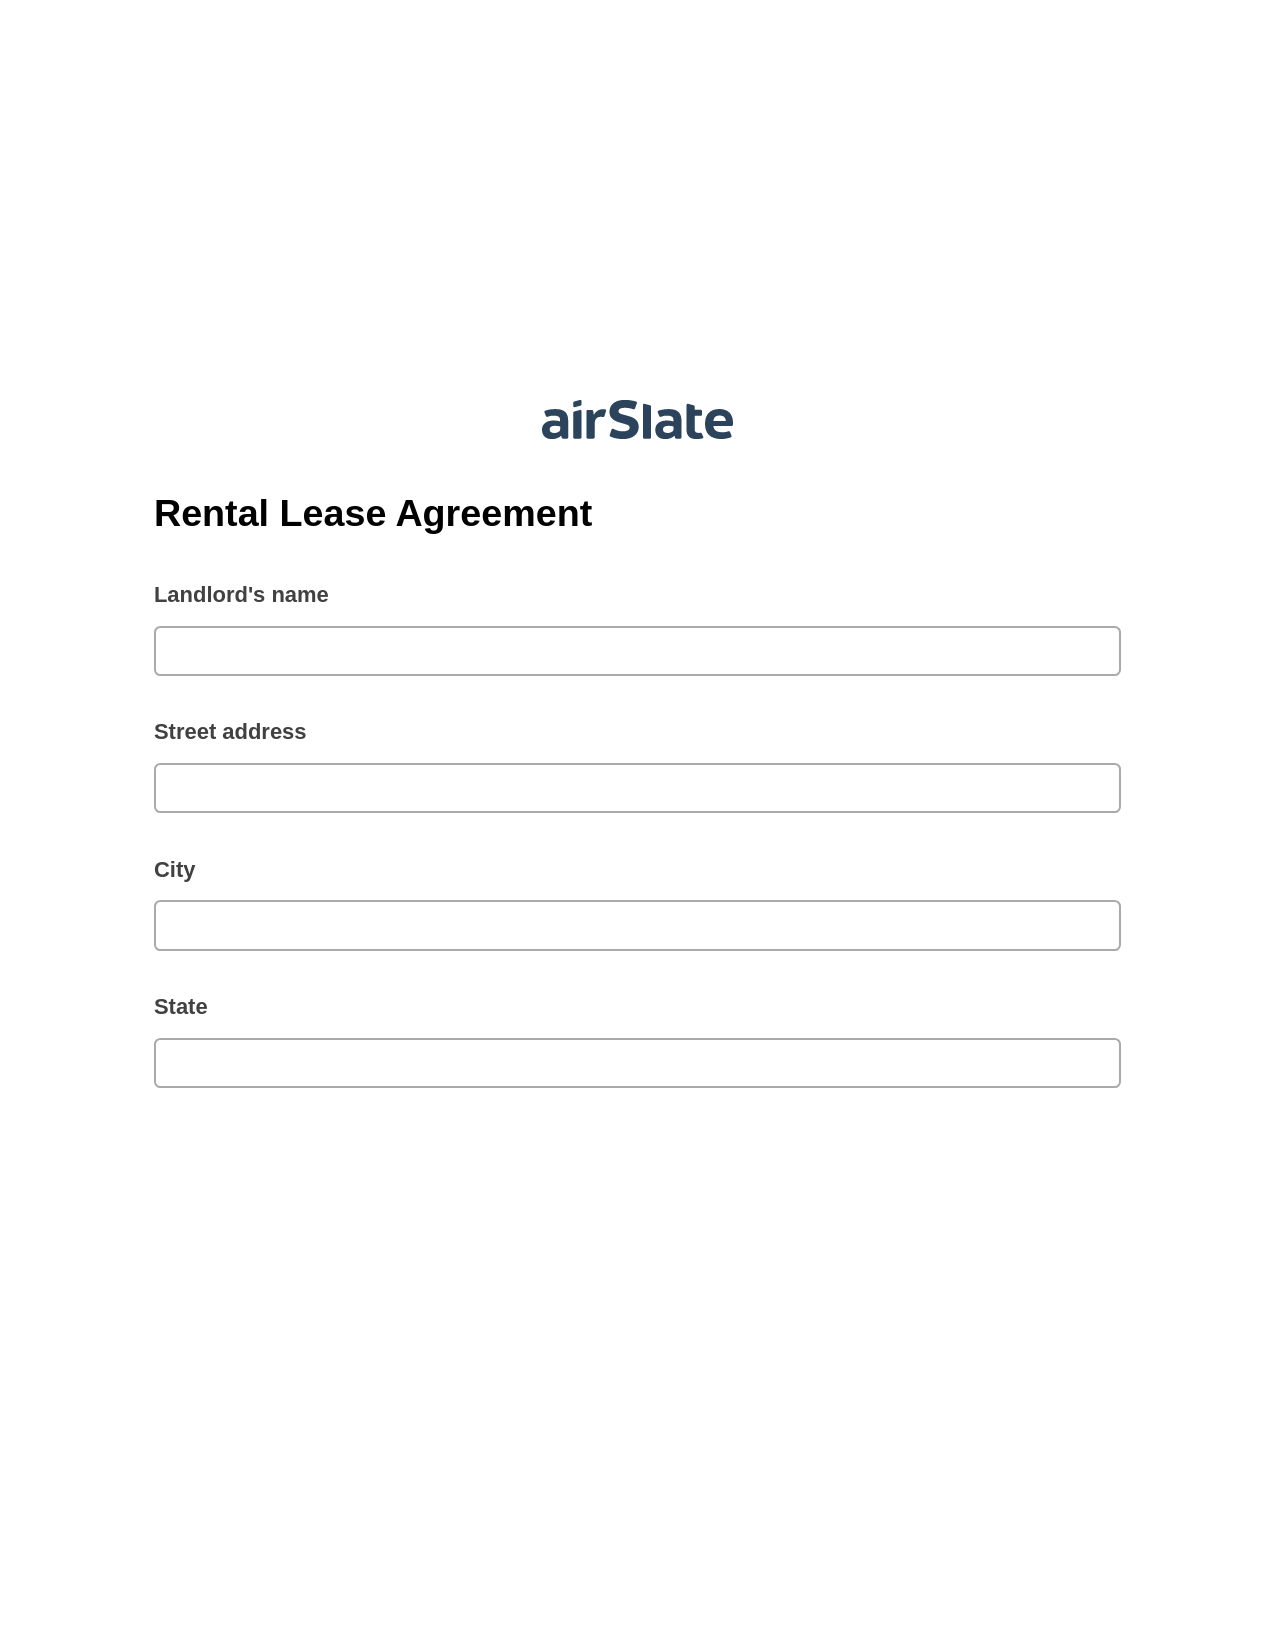 Multirole Rental Lease Agreement Pre-fill from Excel Spreadsheet Bot, Invoke Salesforce Process Bot, Export to Formstack Documents Bot